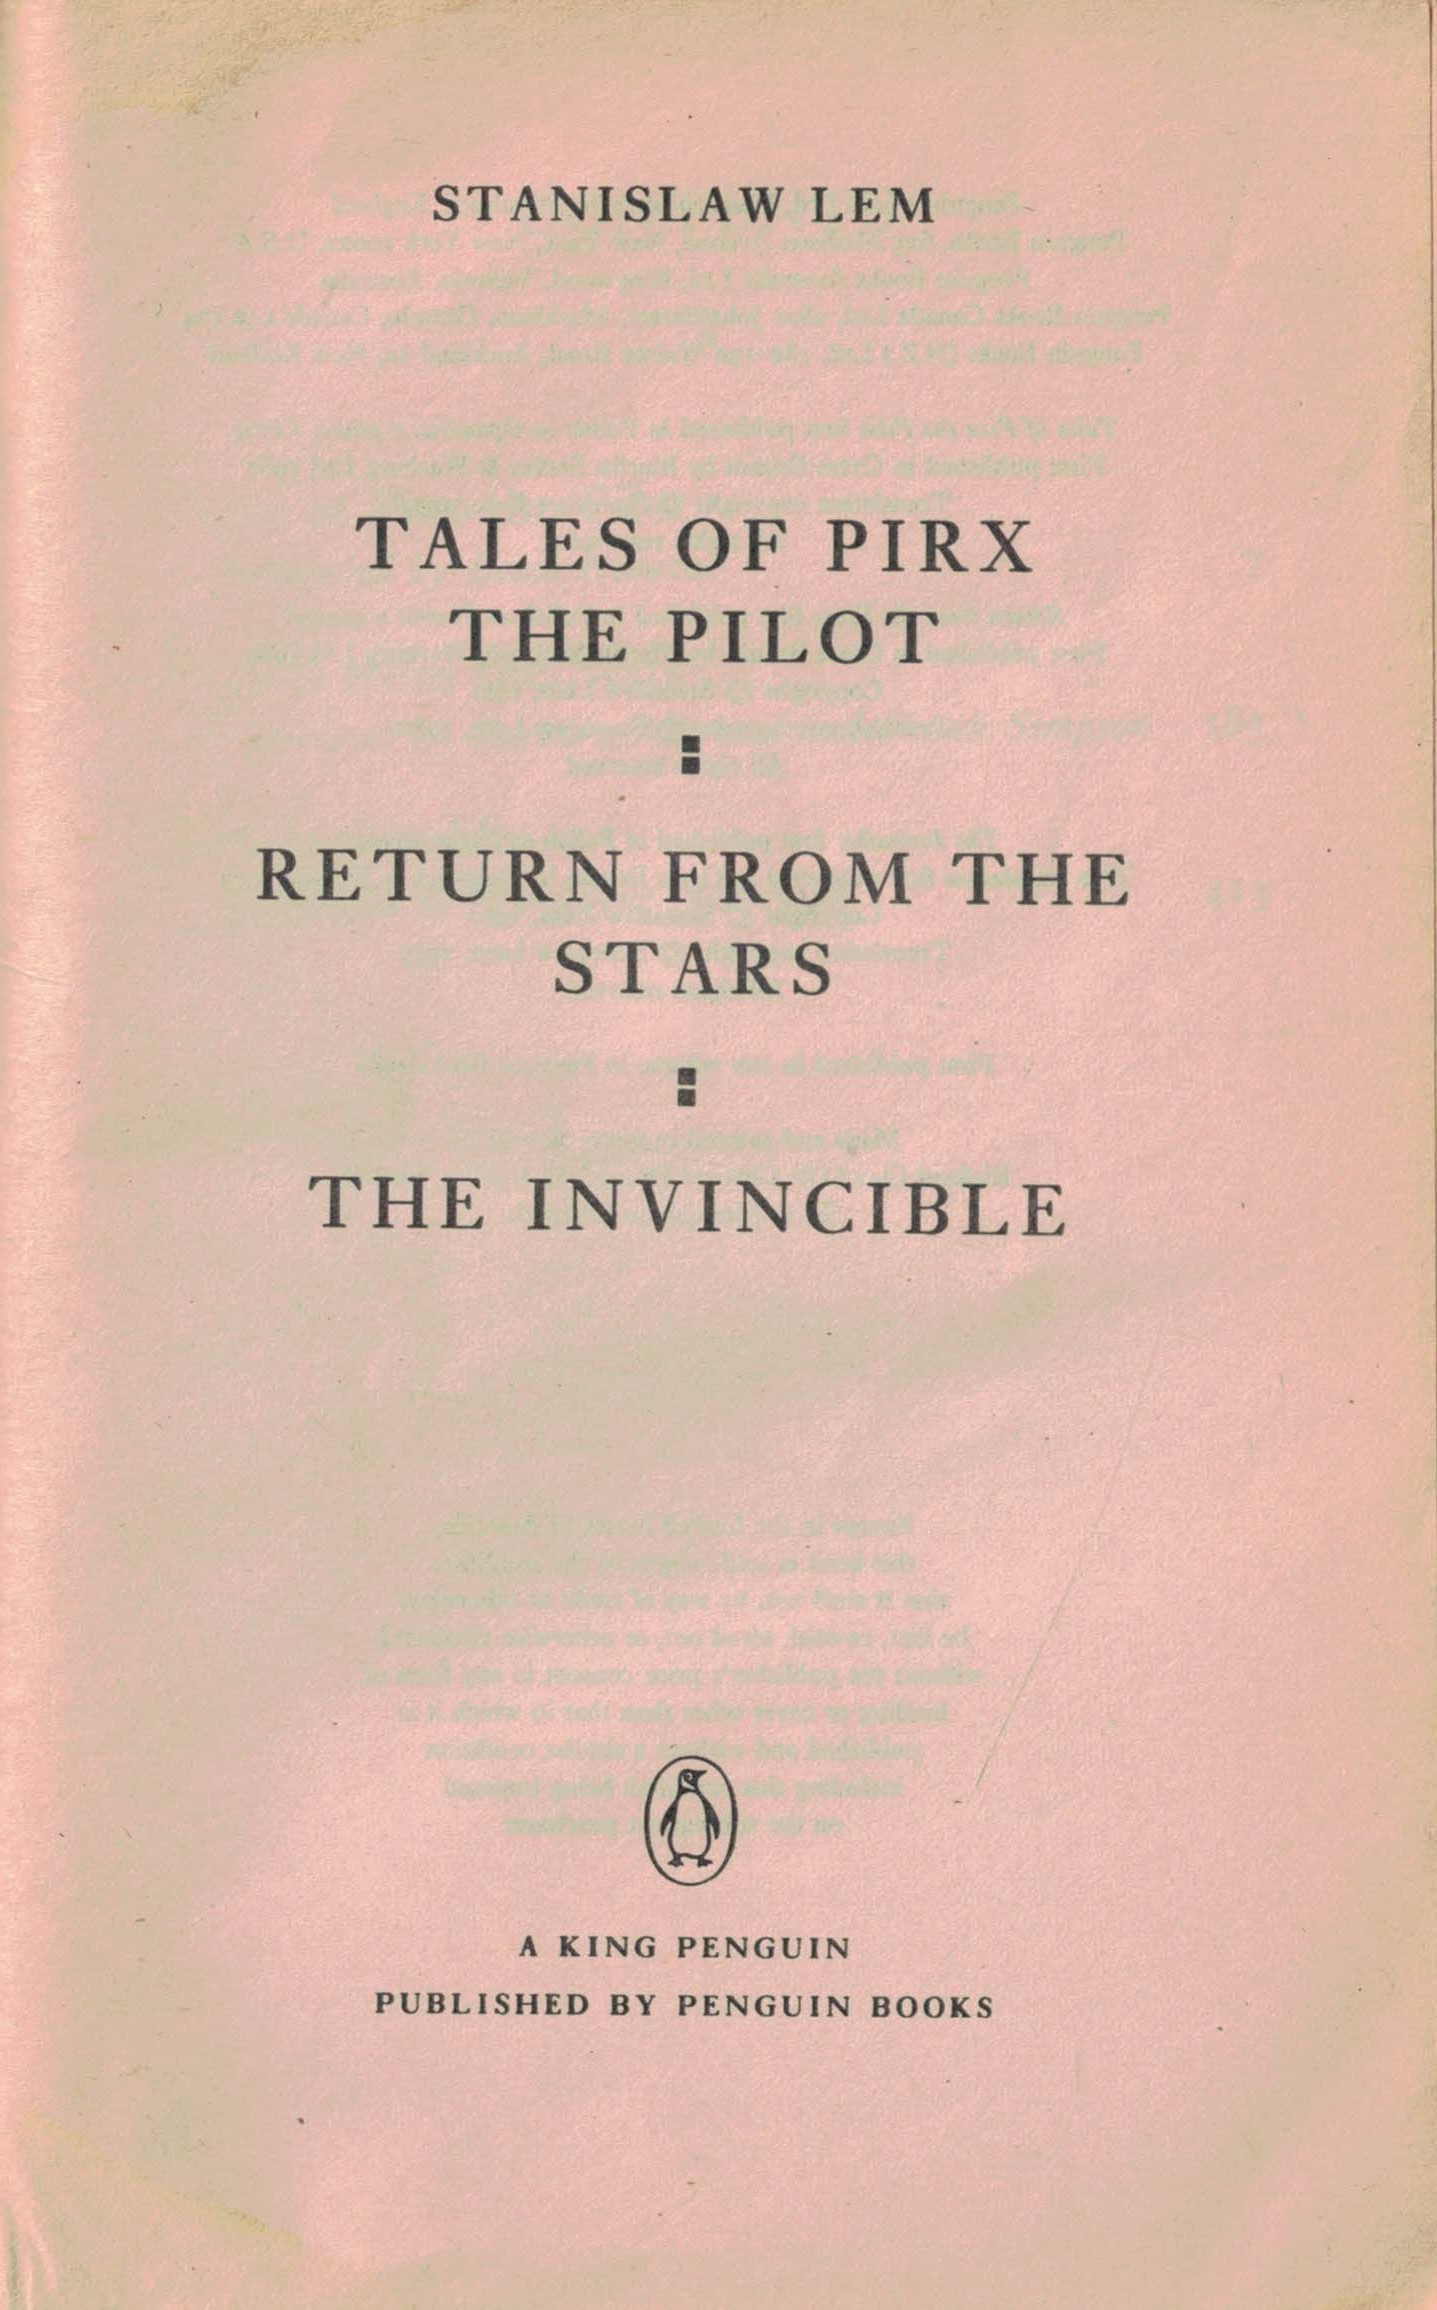 Tales of Pirx the Pilot + Return from the Stars + The Invincble. Penguin single volume edition.